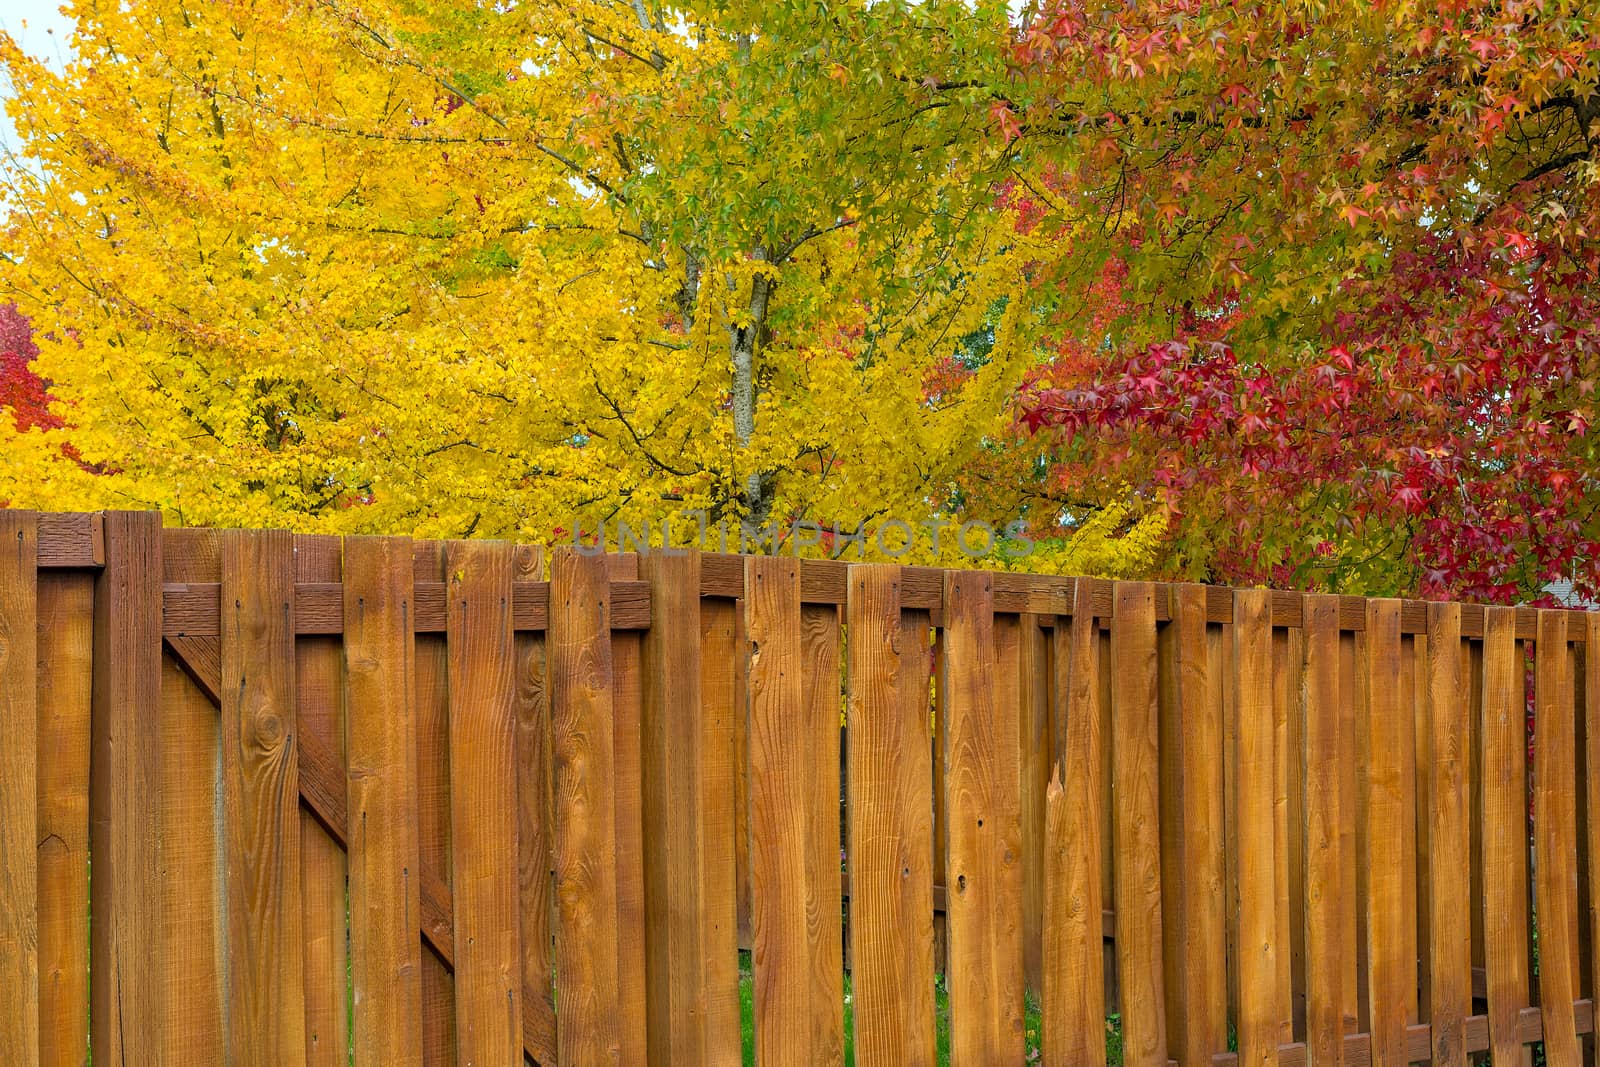 Trees by Backyard Wood Fence in Fall Colors by jpldesigns